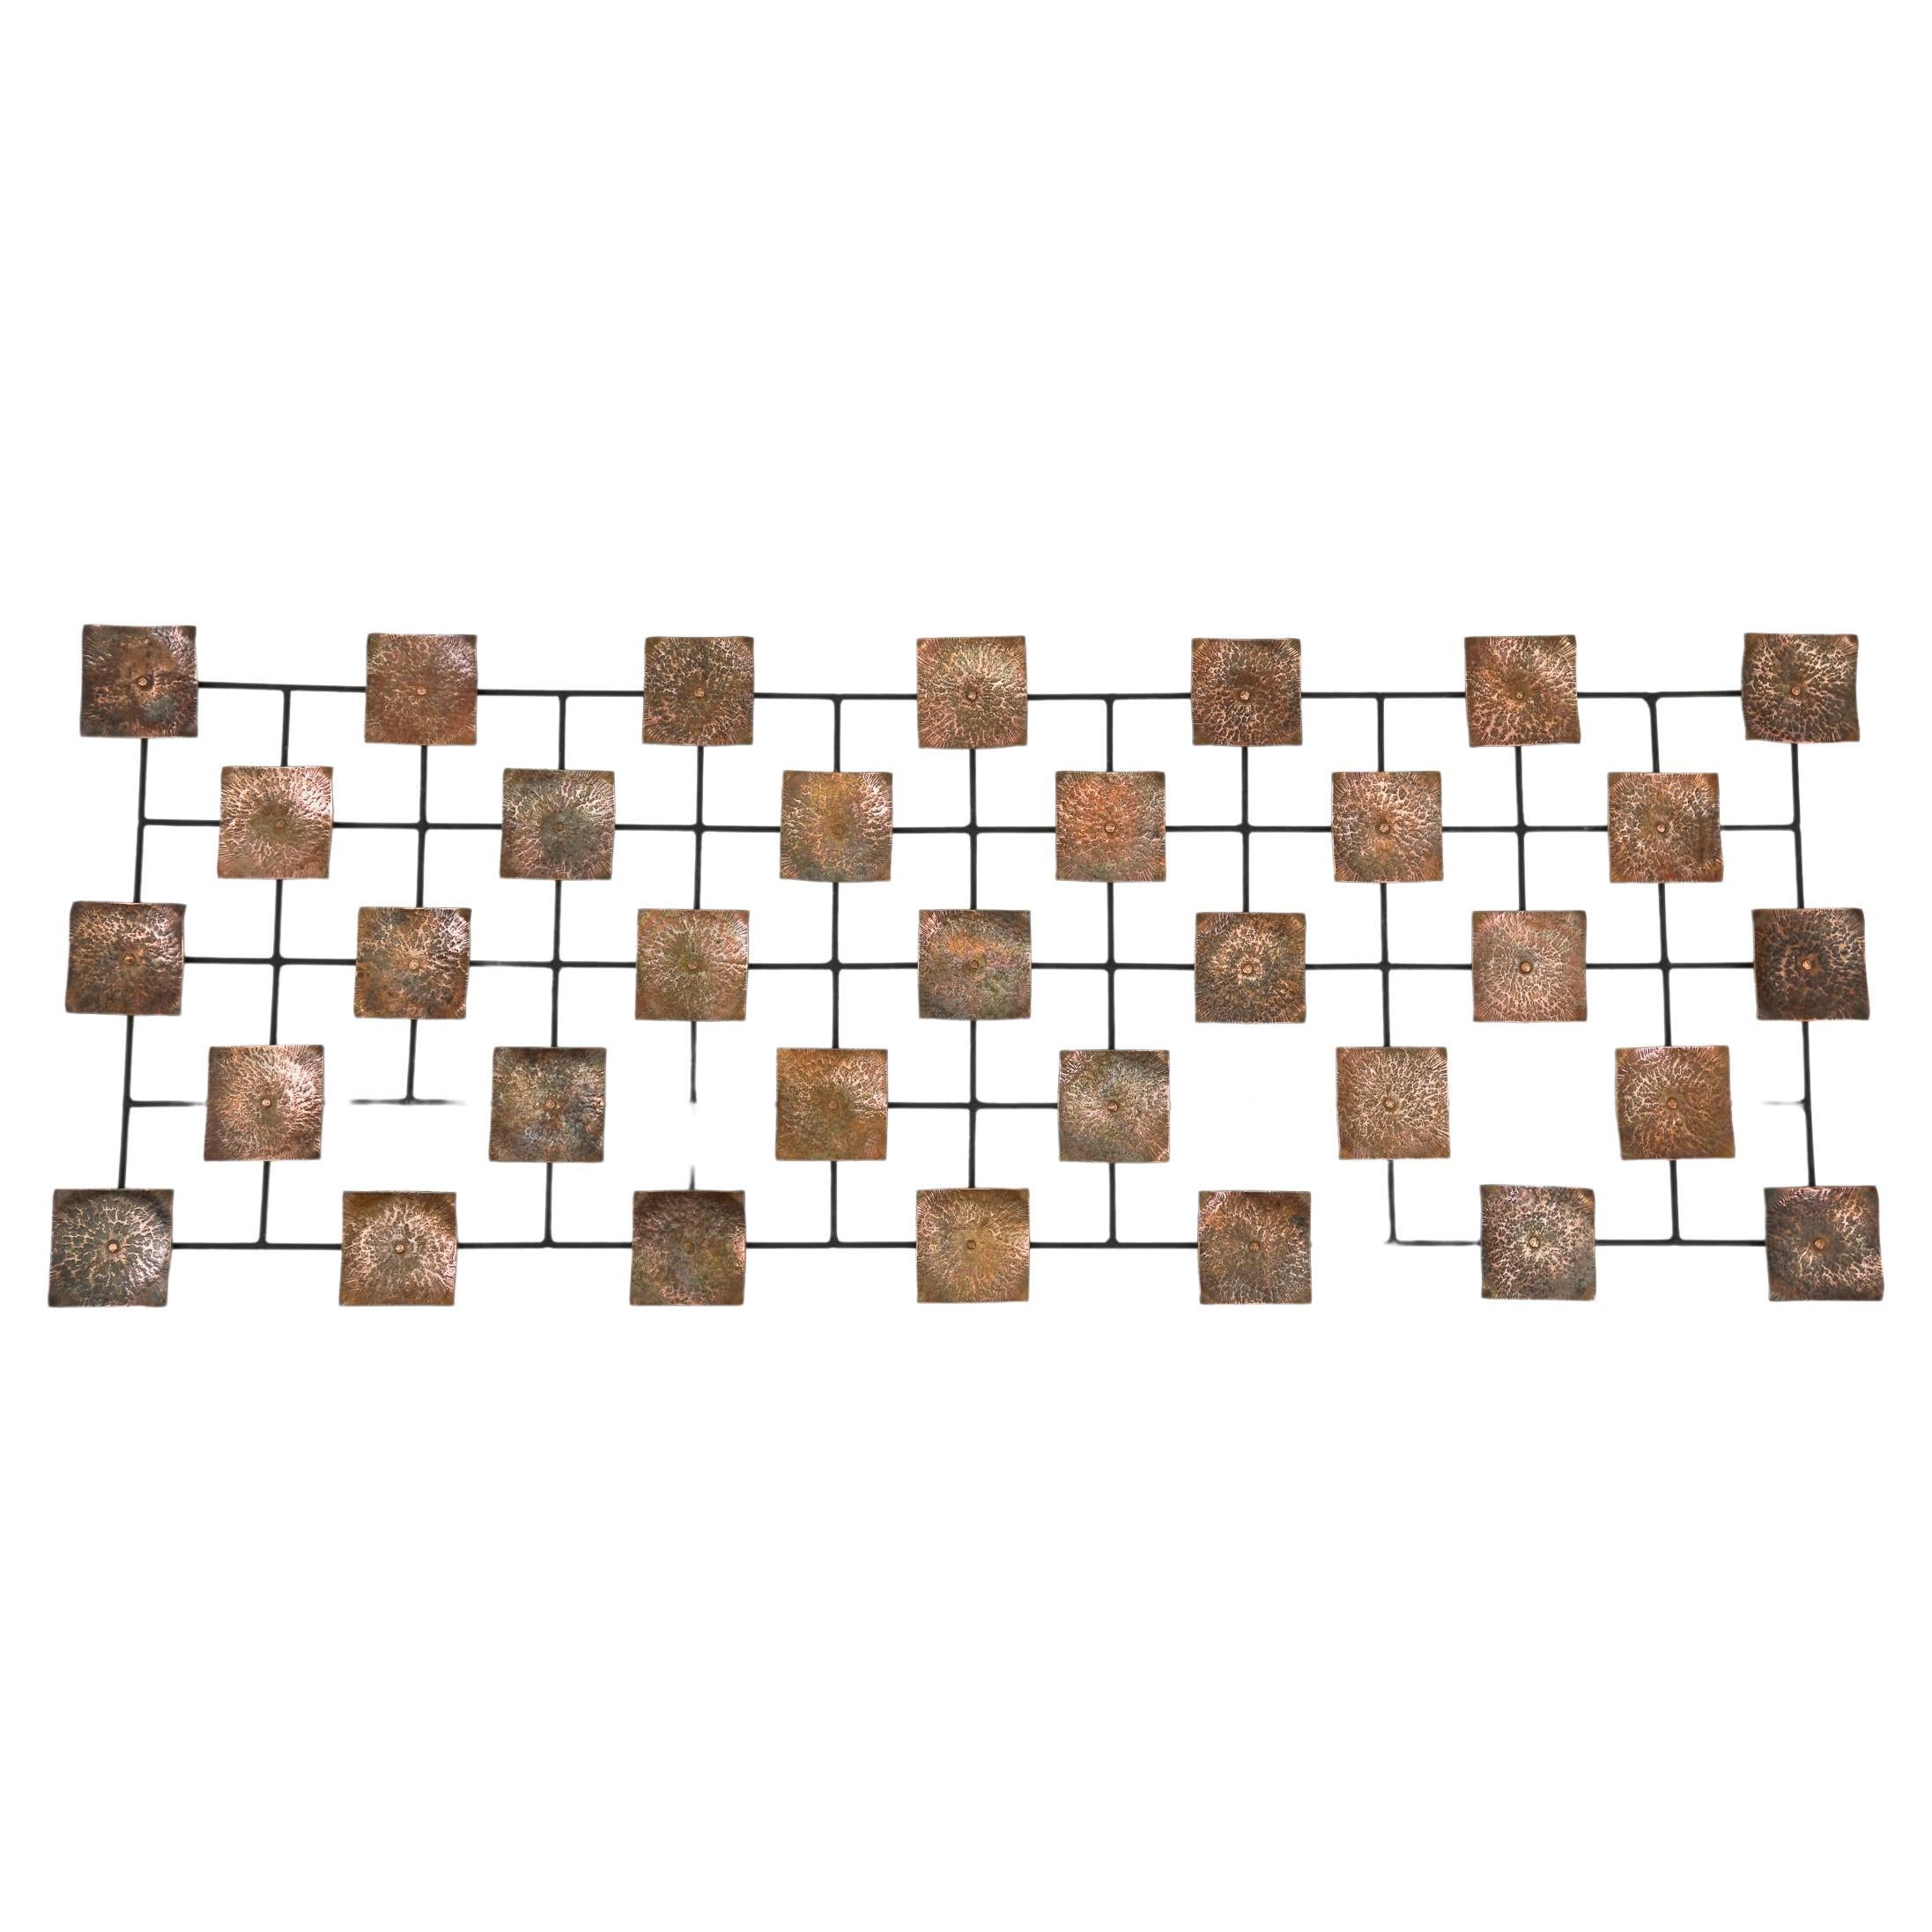 Hang Finished Artist Mural Made of Copper Elements on a Metal Lattice Frame For Sale